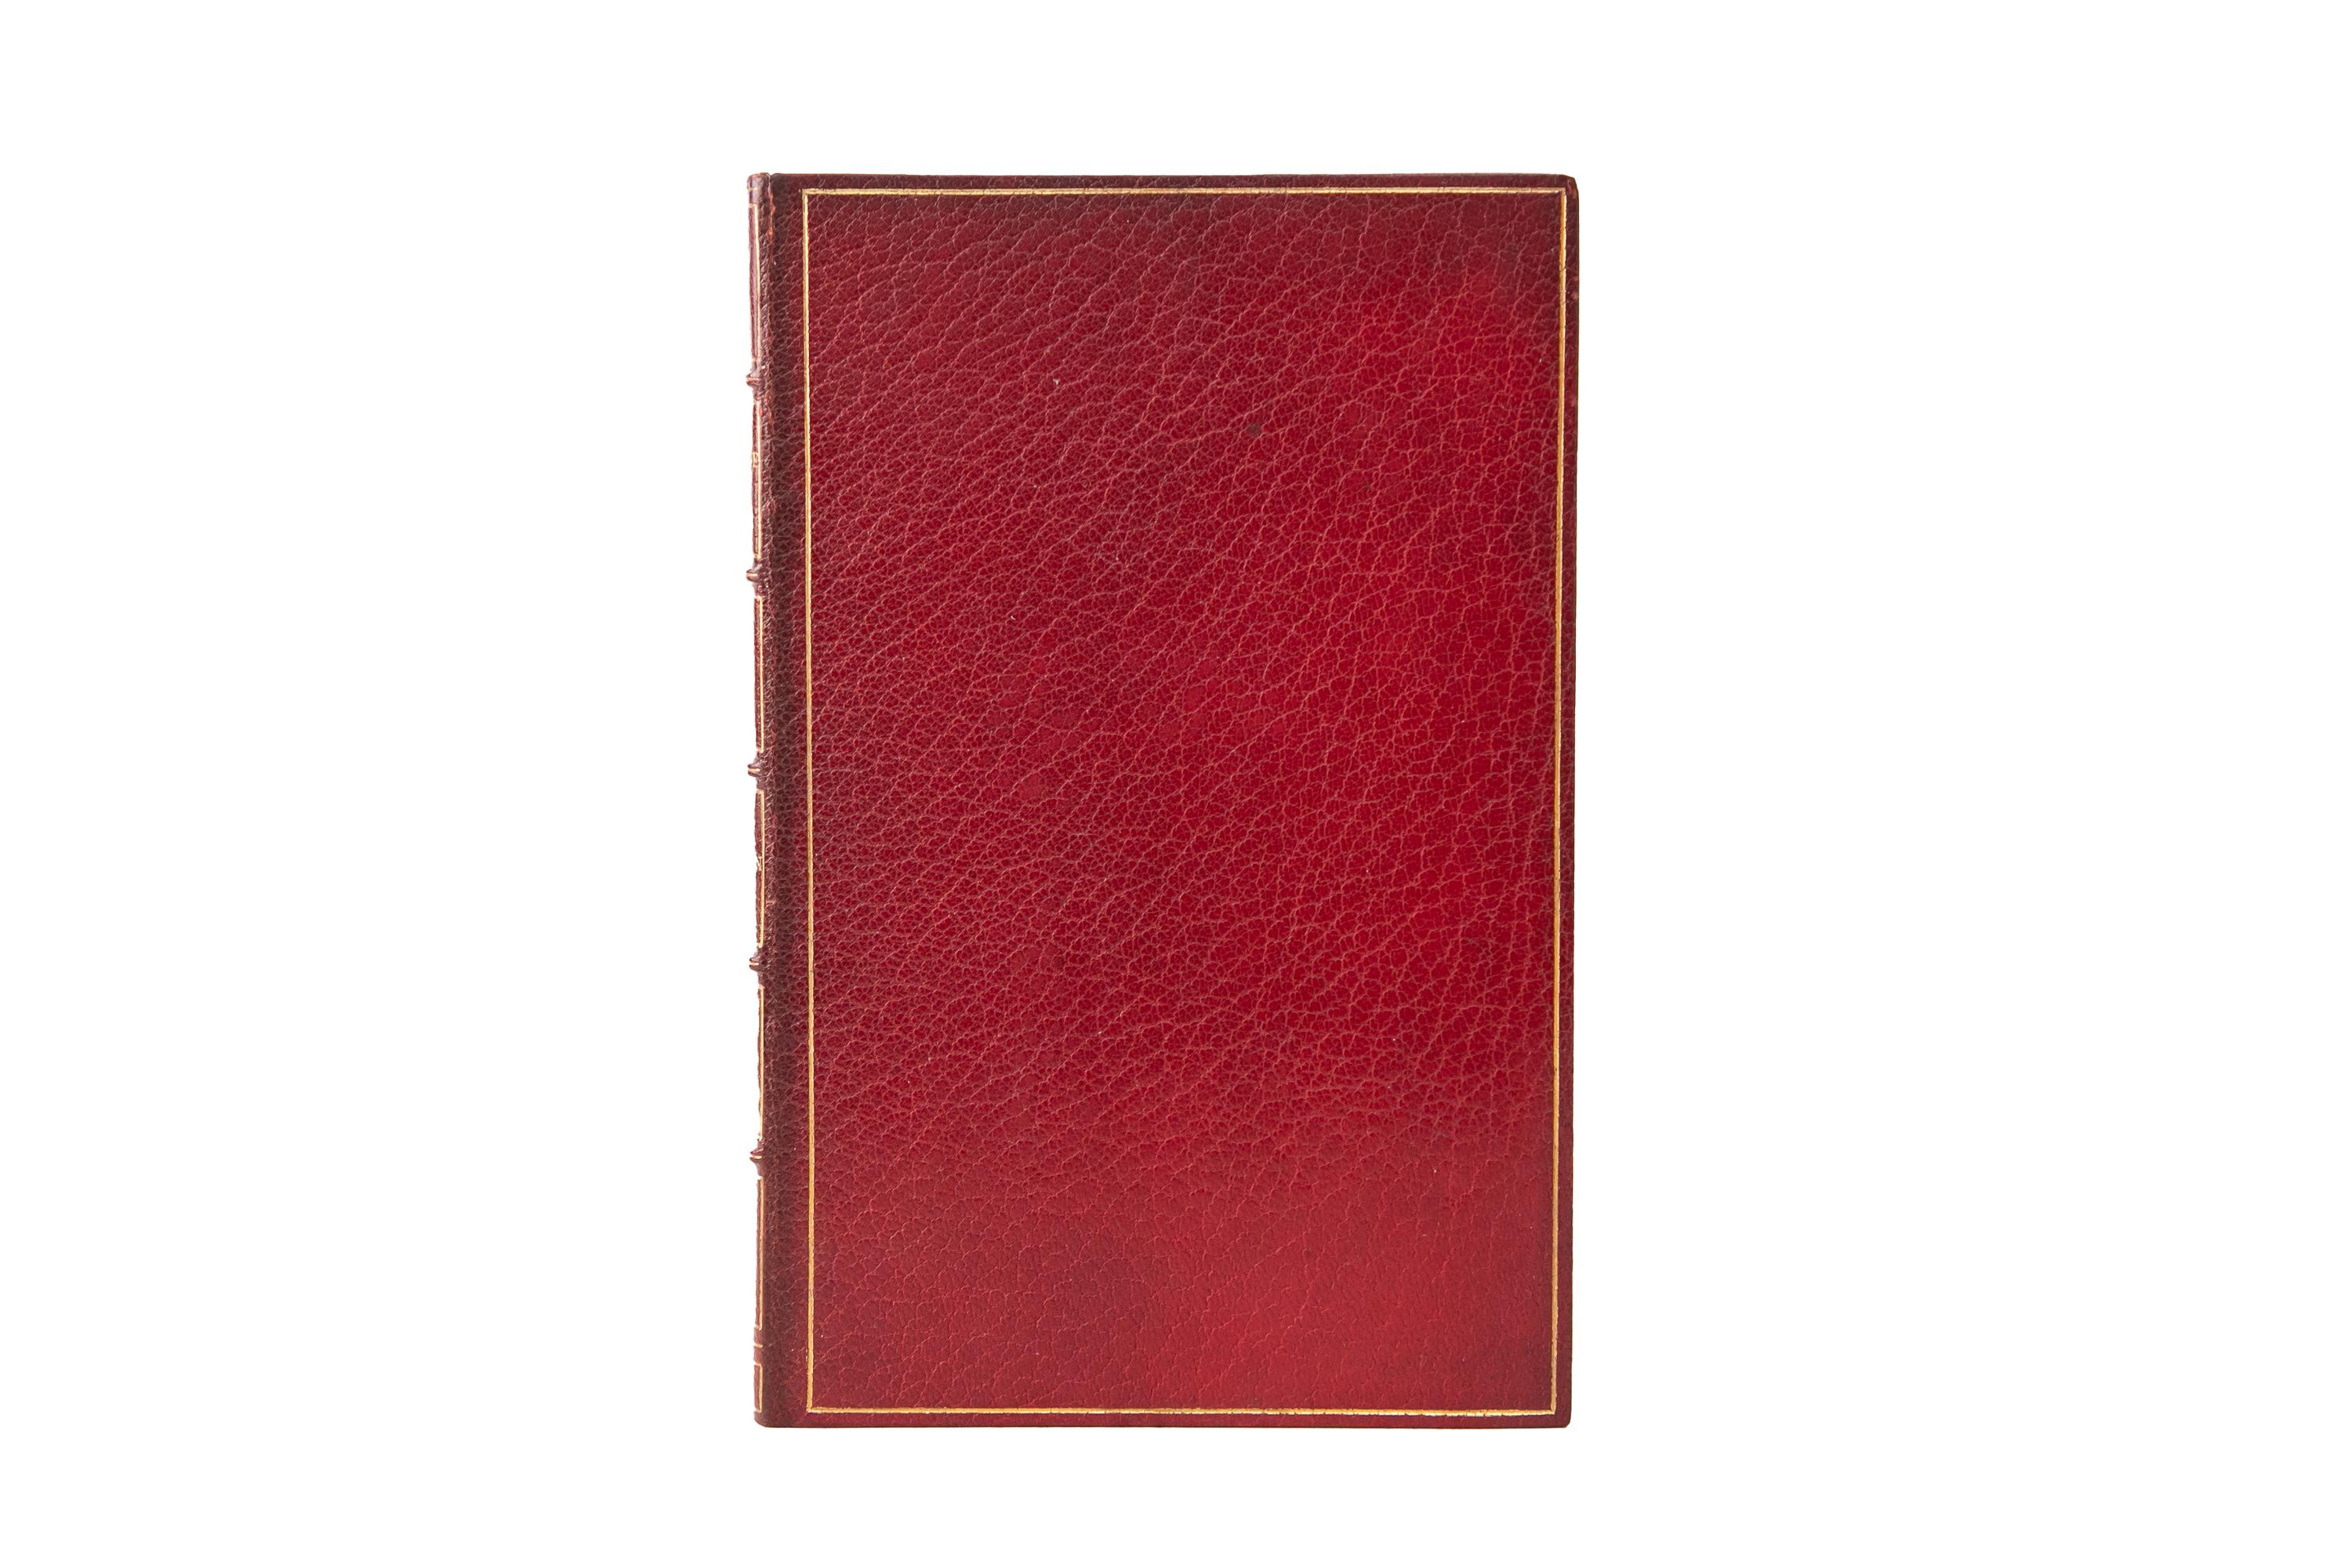 1 Volume. Charles Eliot Norton, The New Life of Dante Alighieri. Bound in full red morocco with the cover displaying a gilt-tooled border. The spine displays raised bands and ornate gilt-tooled detailing. The top edge is gilded with gilt-tooled